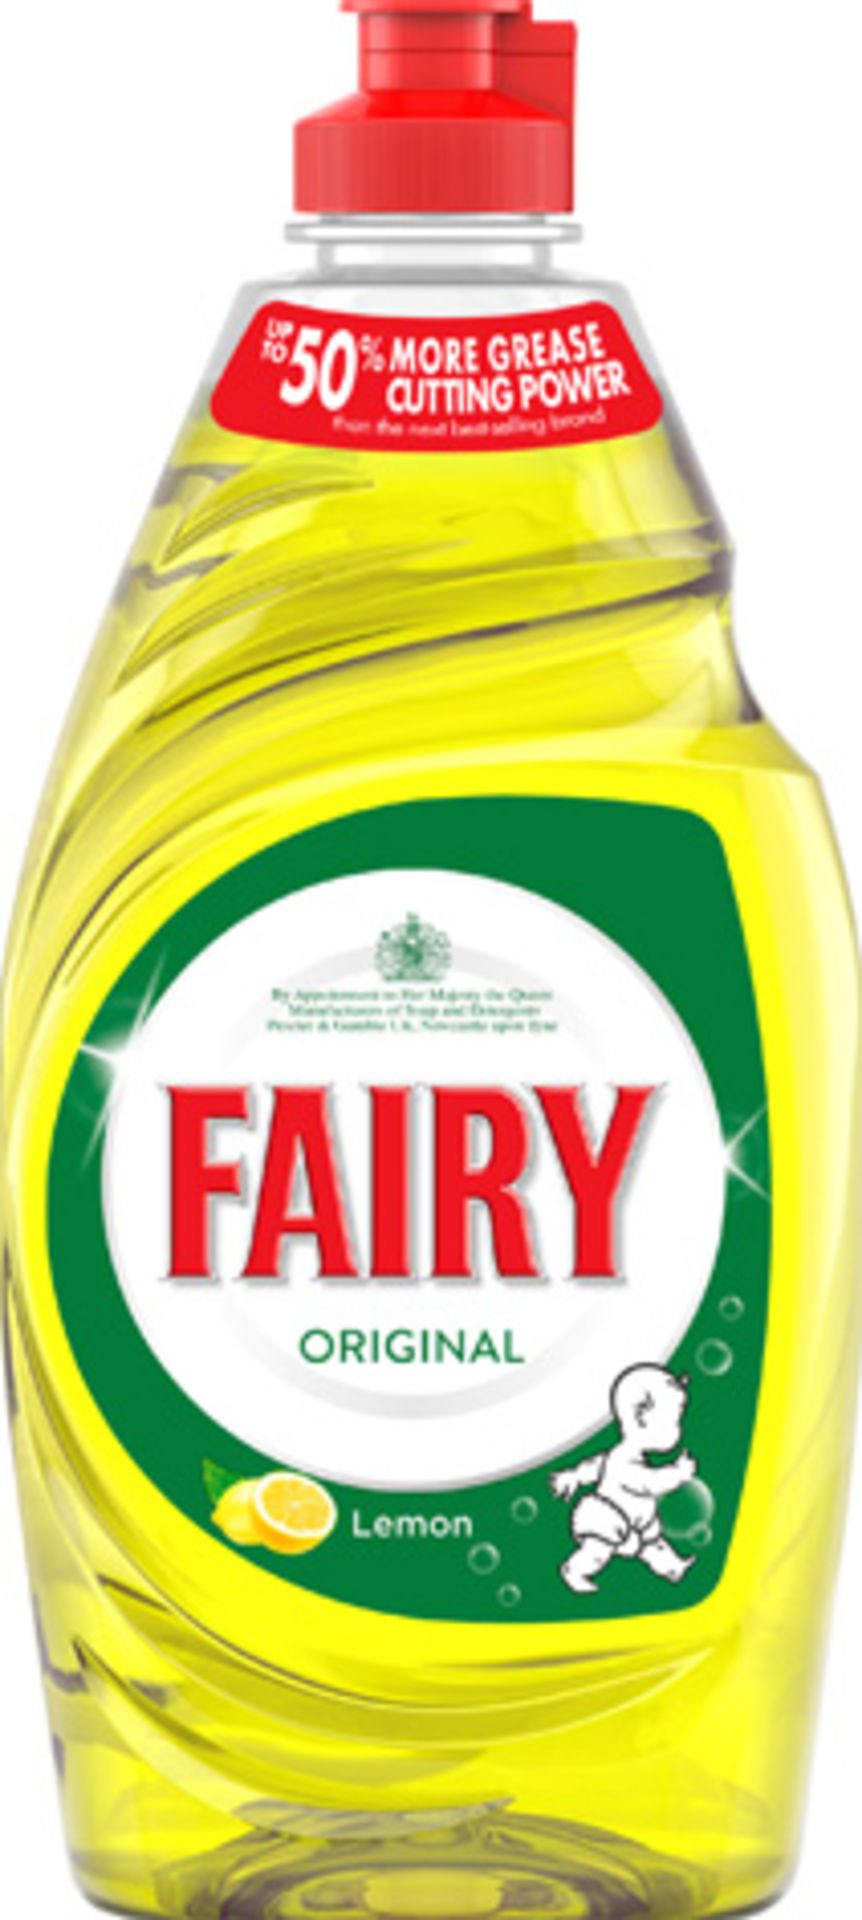 Fairy Washing Up Liquid Lemon 433ml x 100, Postage available by ParcelForce Express 48 £29.99